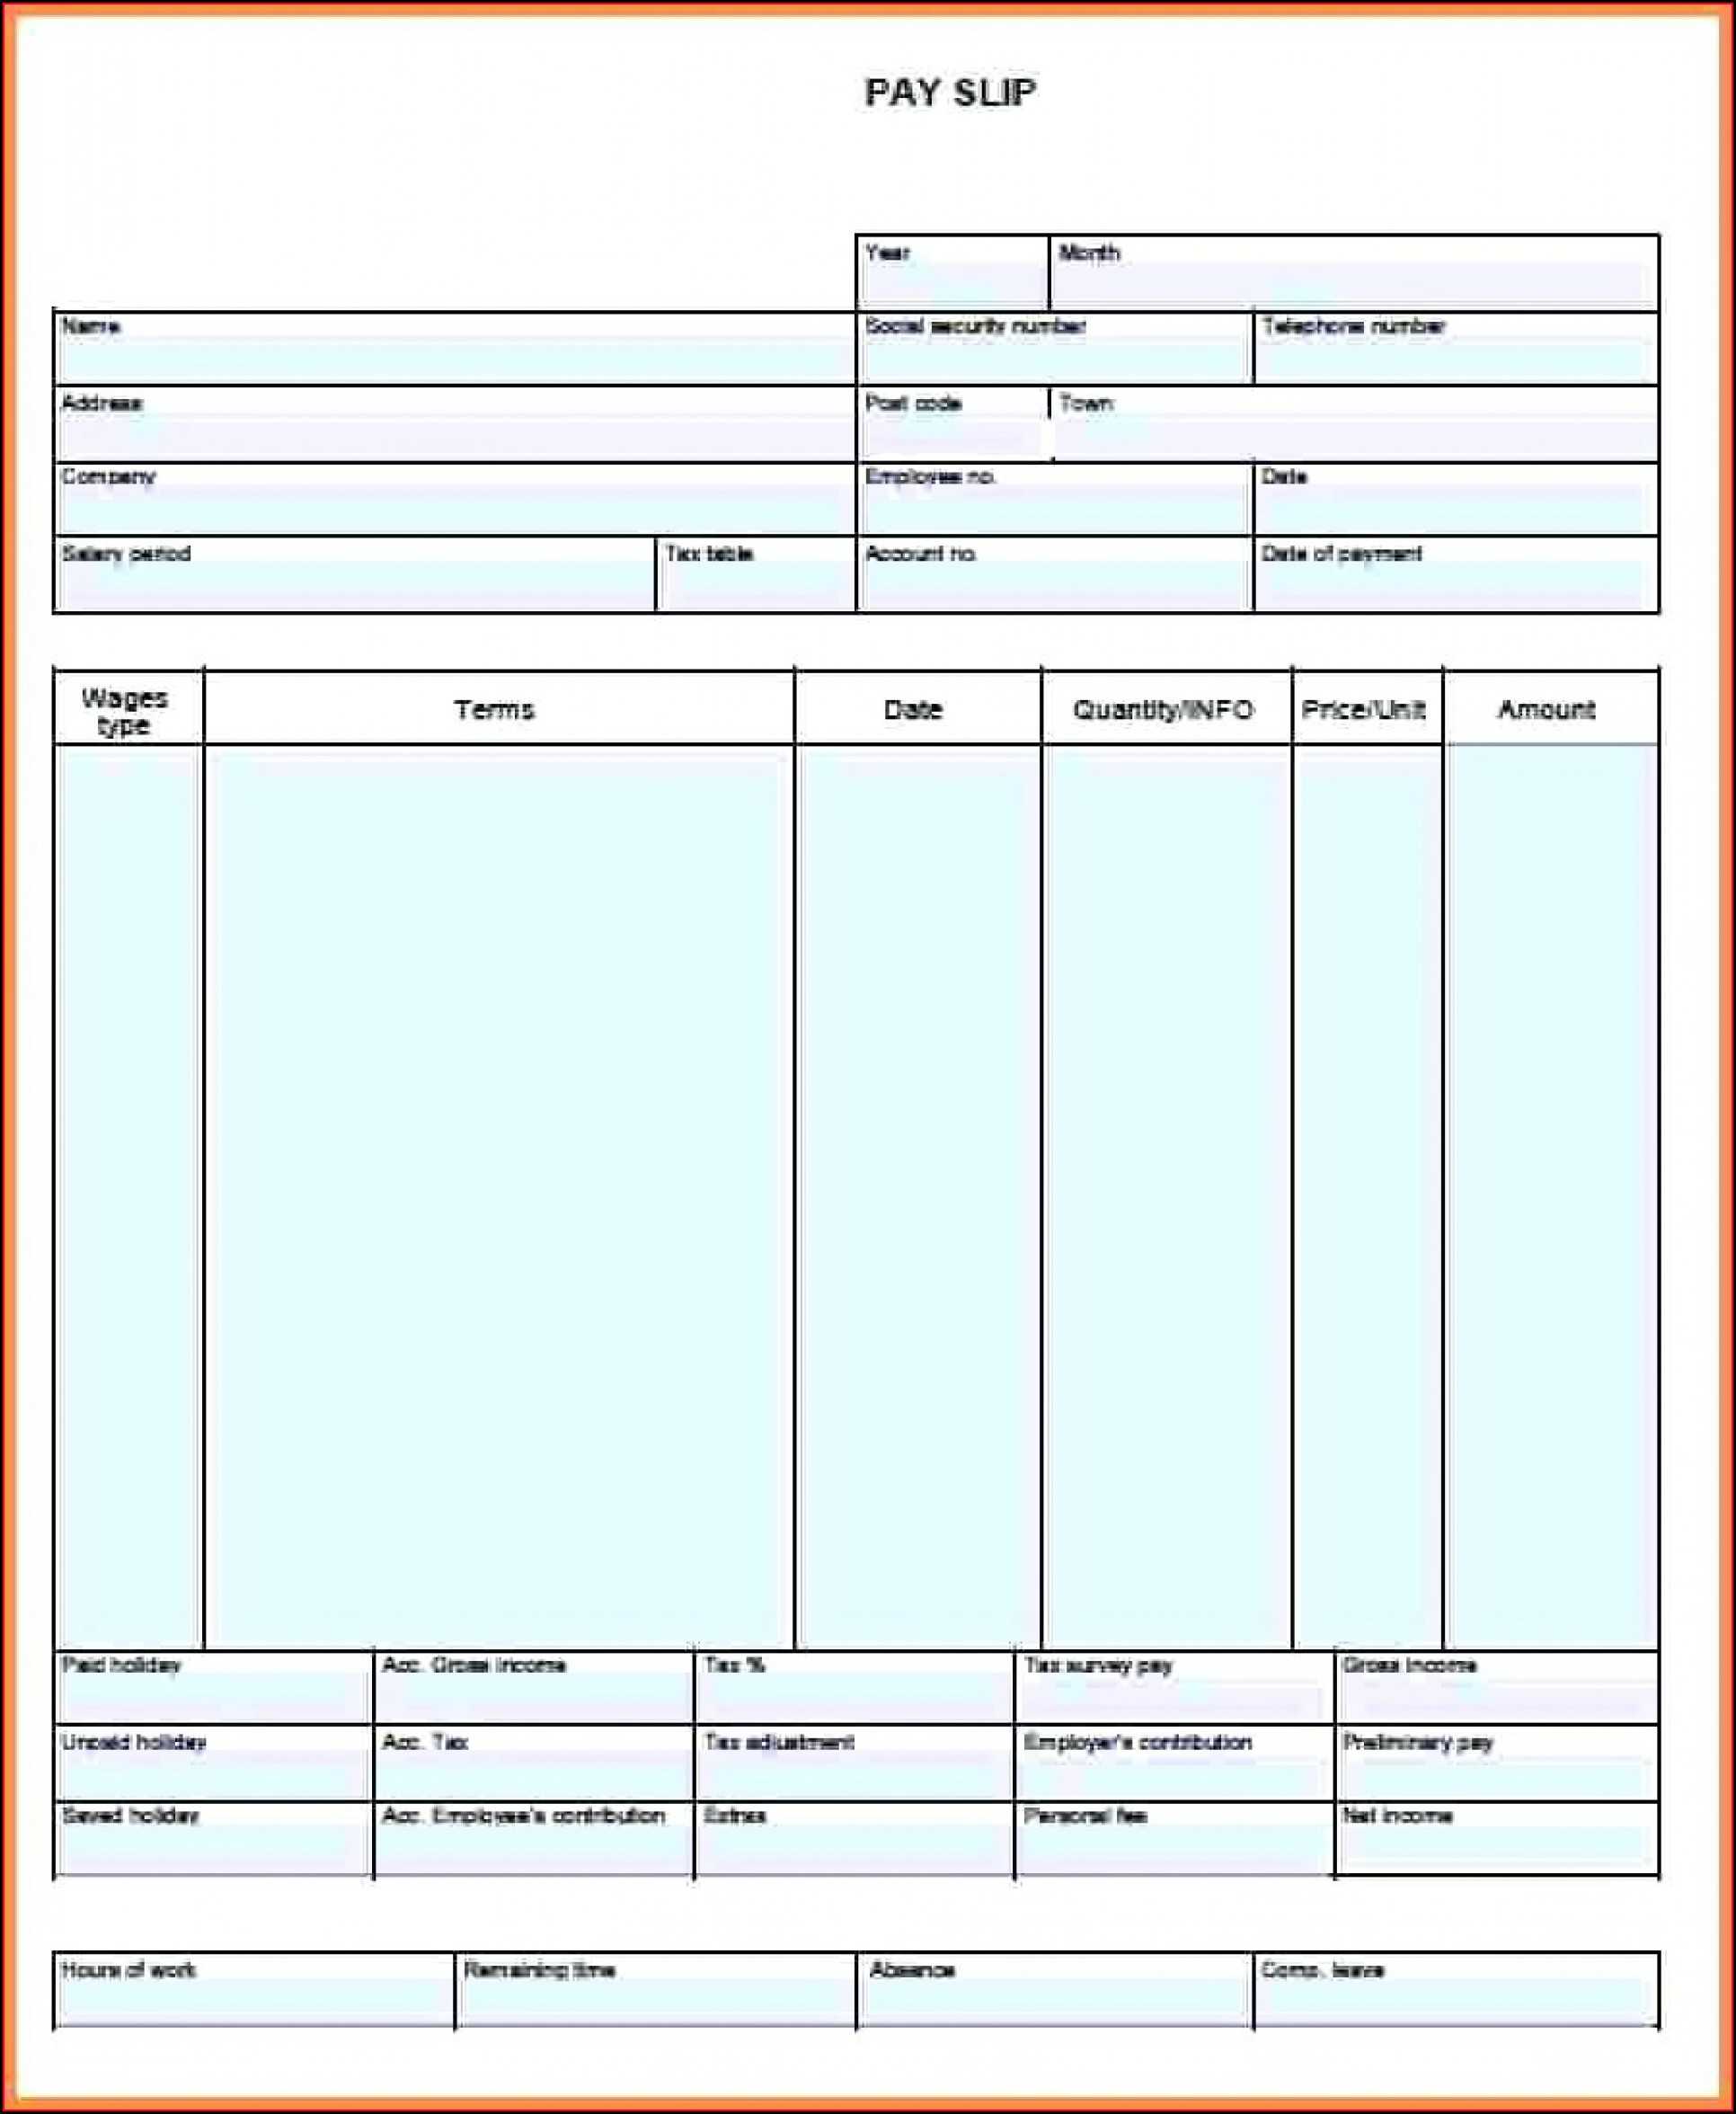 Adp Pay Stub Template Download – Template 1 : Resume For Blank Pay Stubs Template